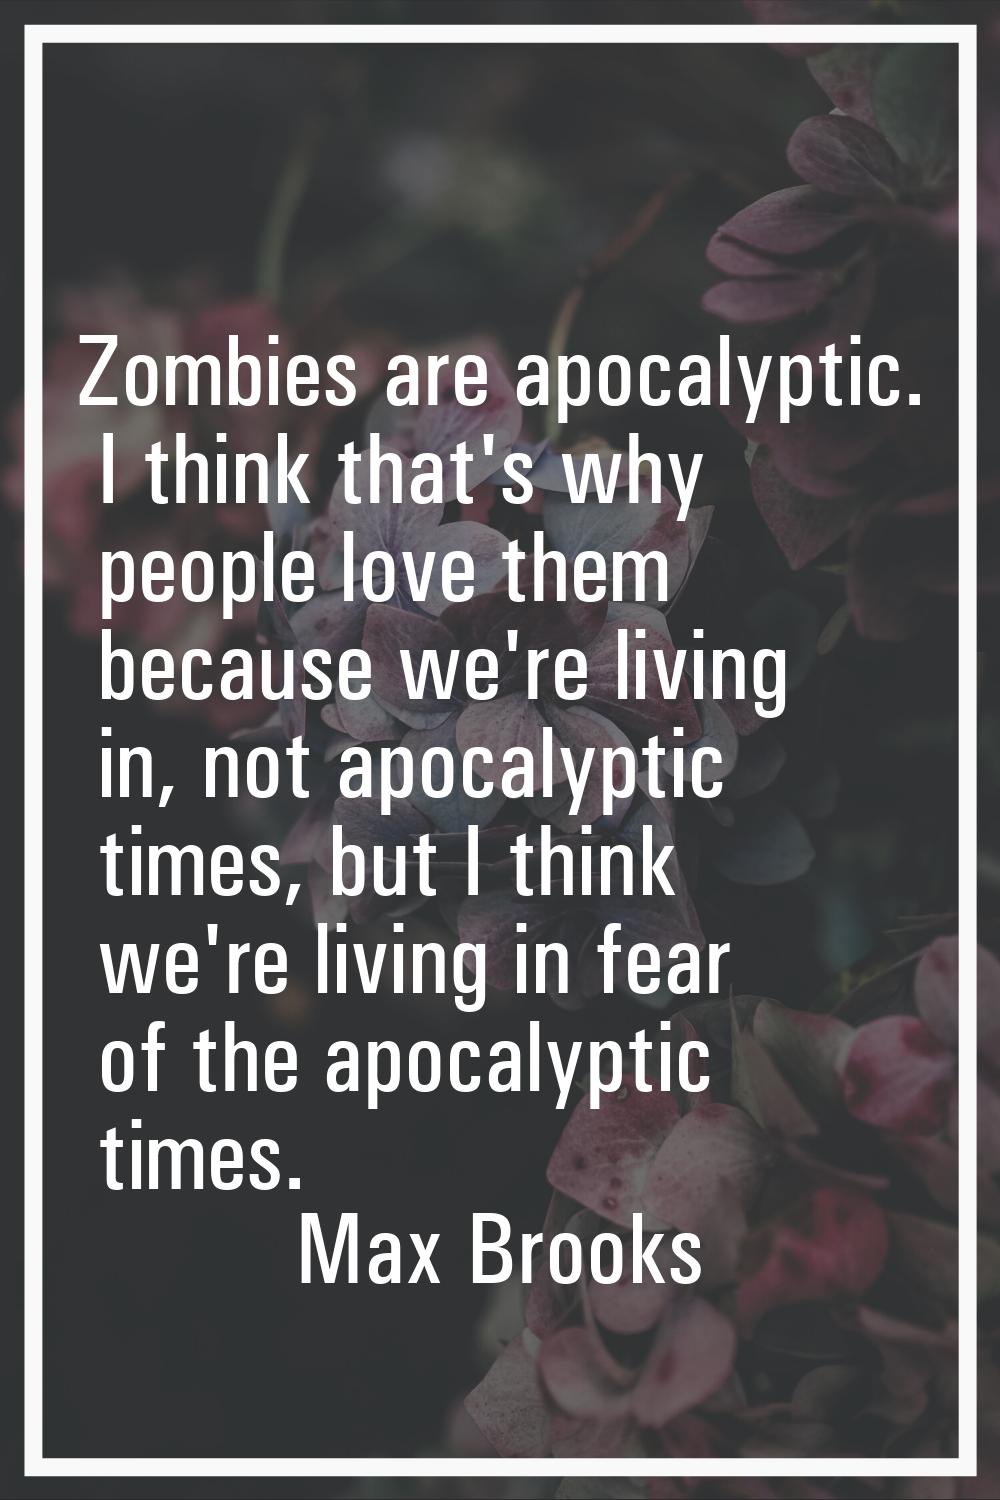 Zombies are apocalyptic. I think that's why people love them because we're living in, not apocalypt